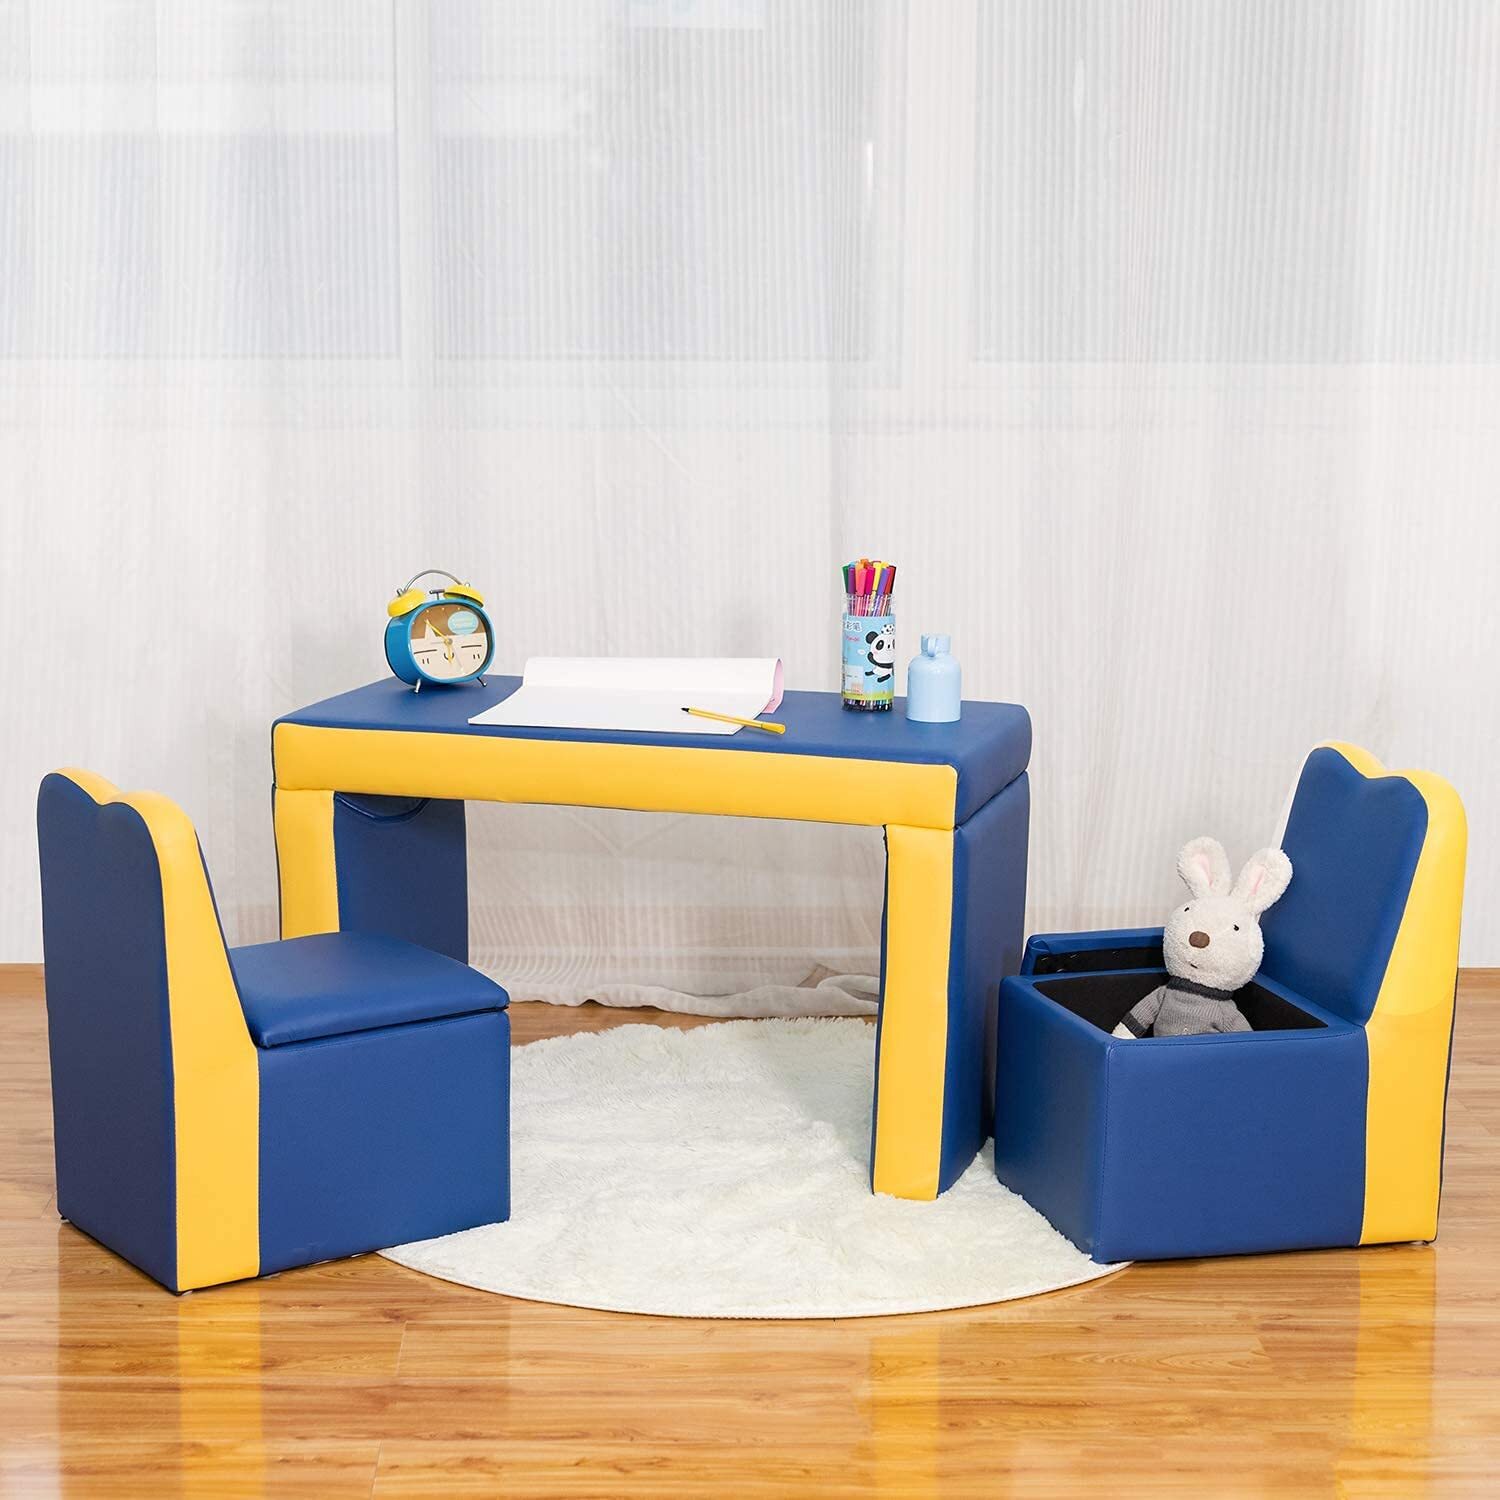 Kids Sofa, 2 in 1 Double Sofa Convert to Table and Two Chairs